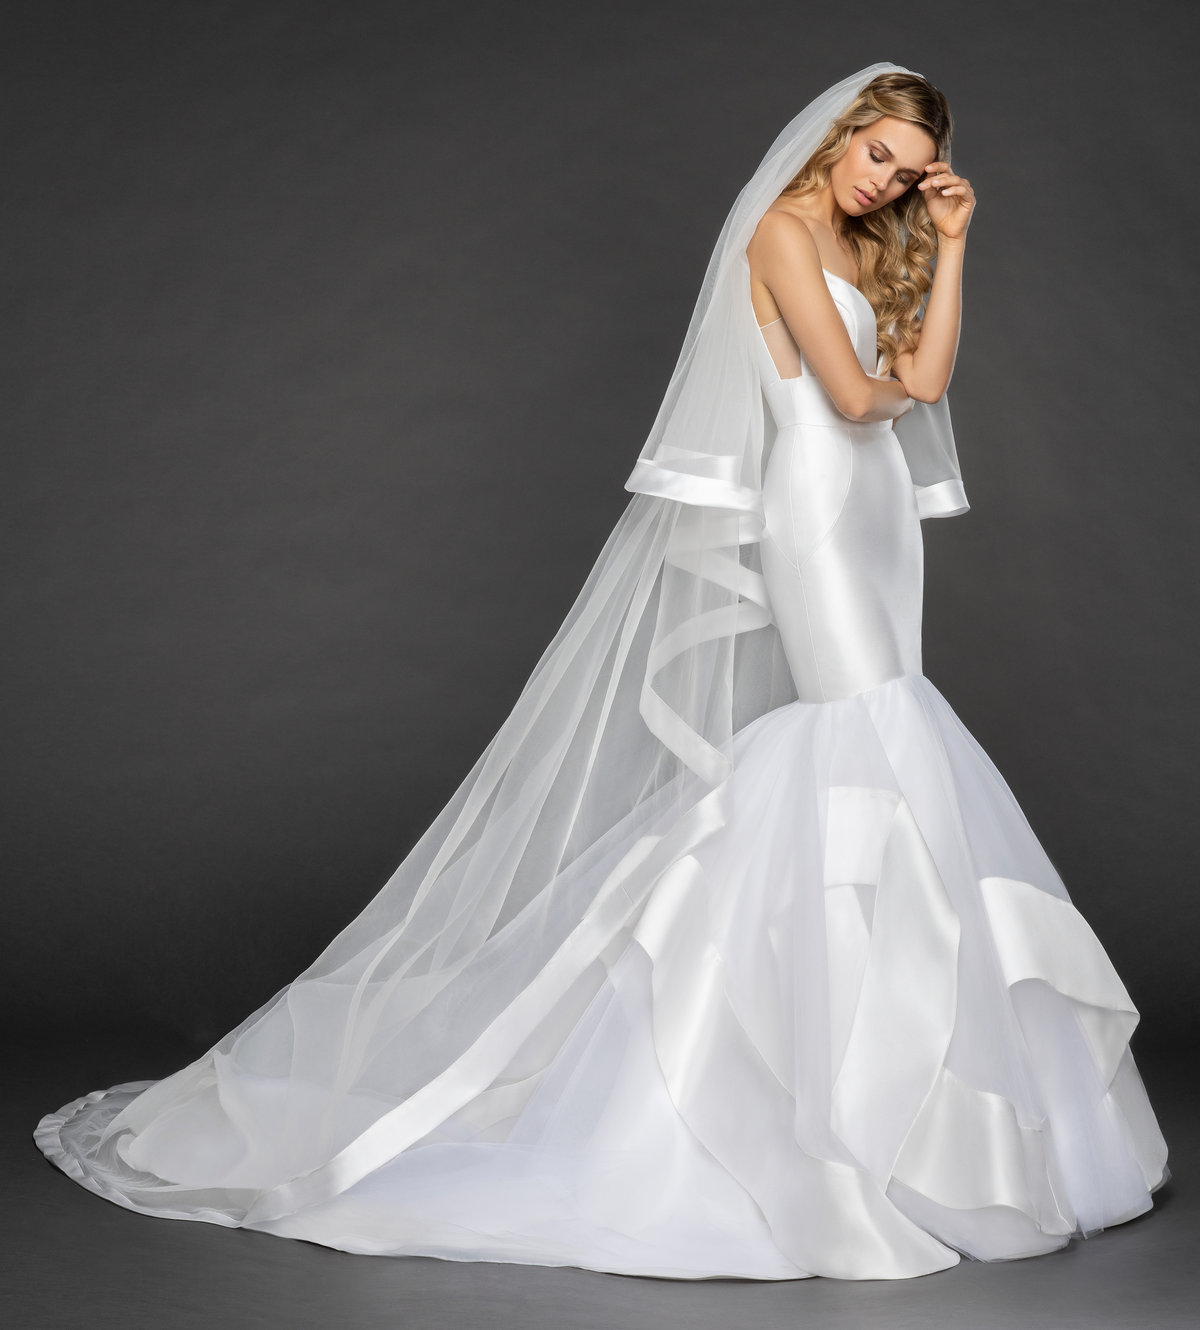  Bridal  Gowns  and Wedding  Dresses  by JLM Couture Style Nevada